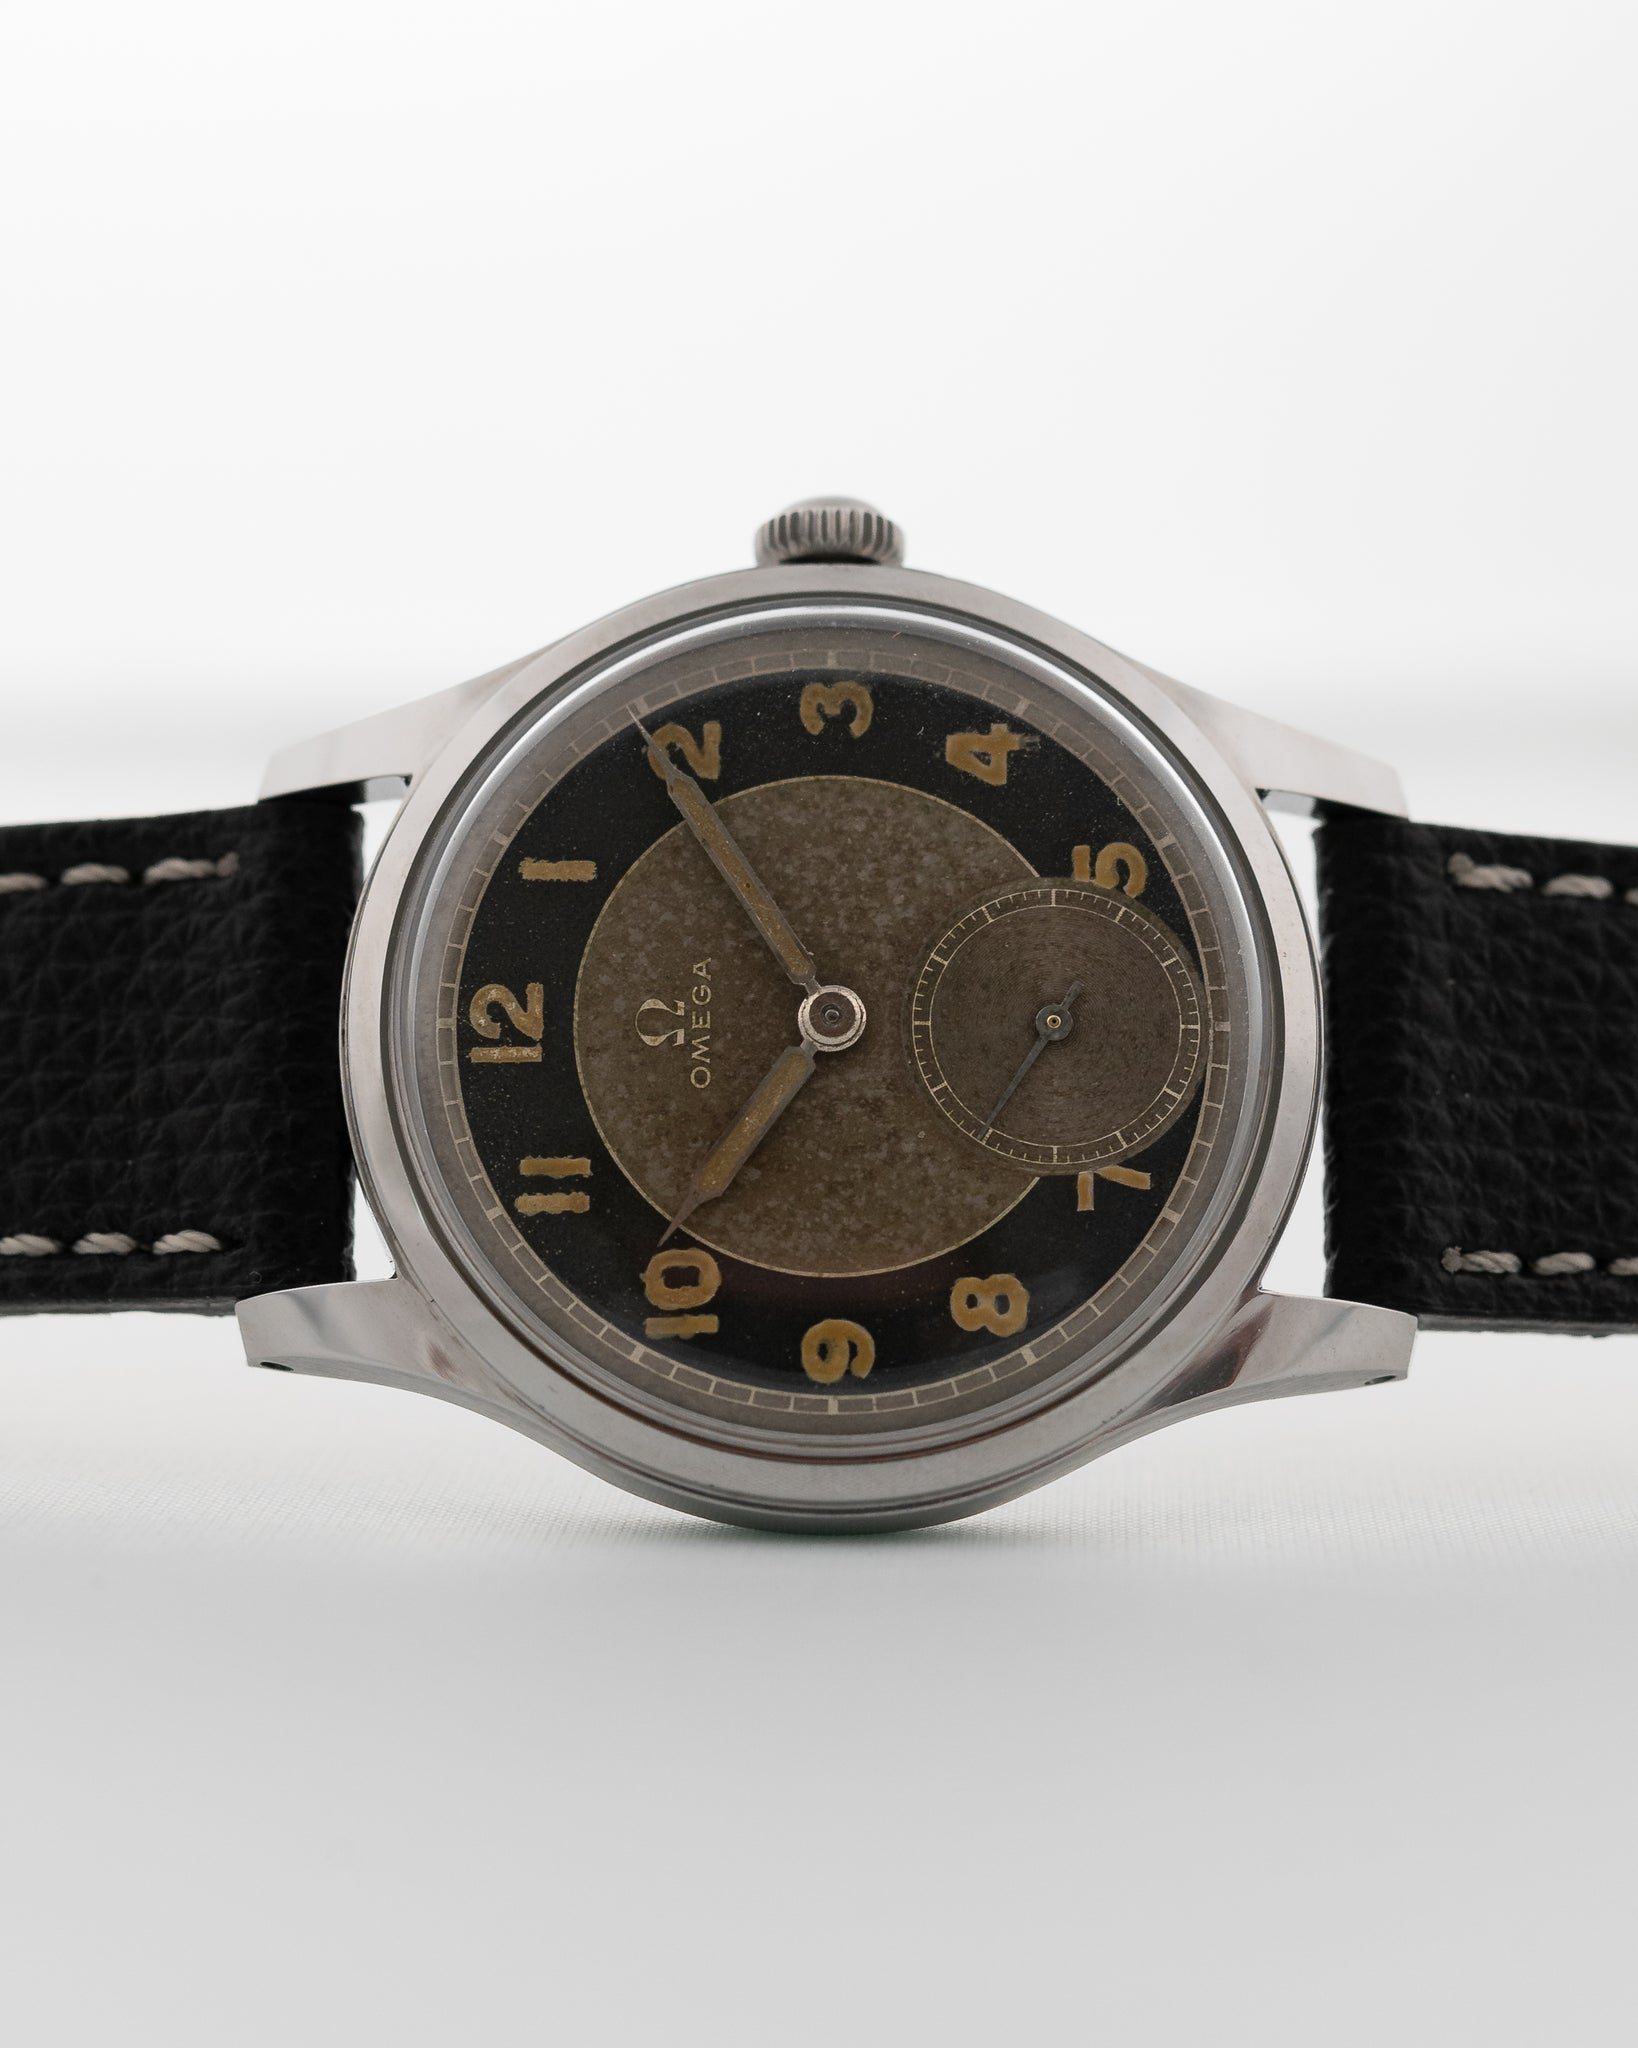 Omega Souverän two tone 1943 - Goldammer Vintage Watches